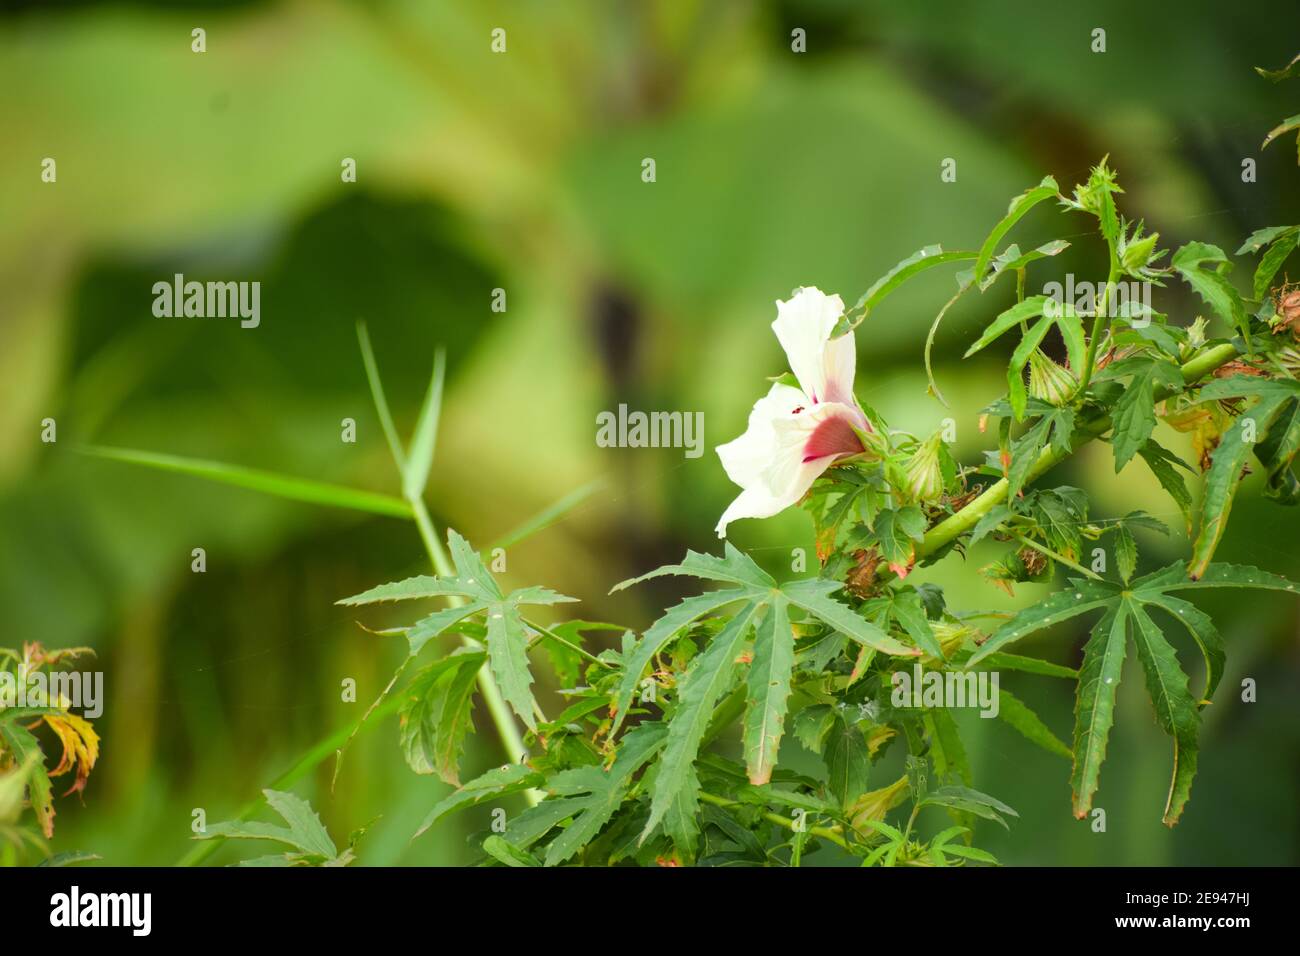 Blossomed flower of a kenaf plant (Hibiscus cannabinus) Stock Photo